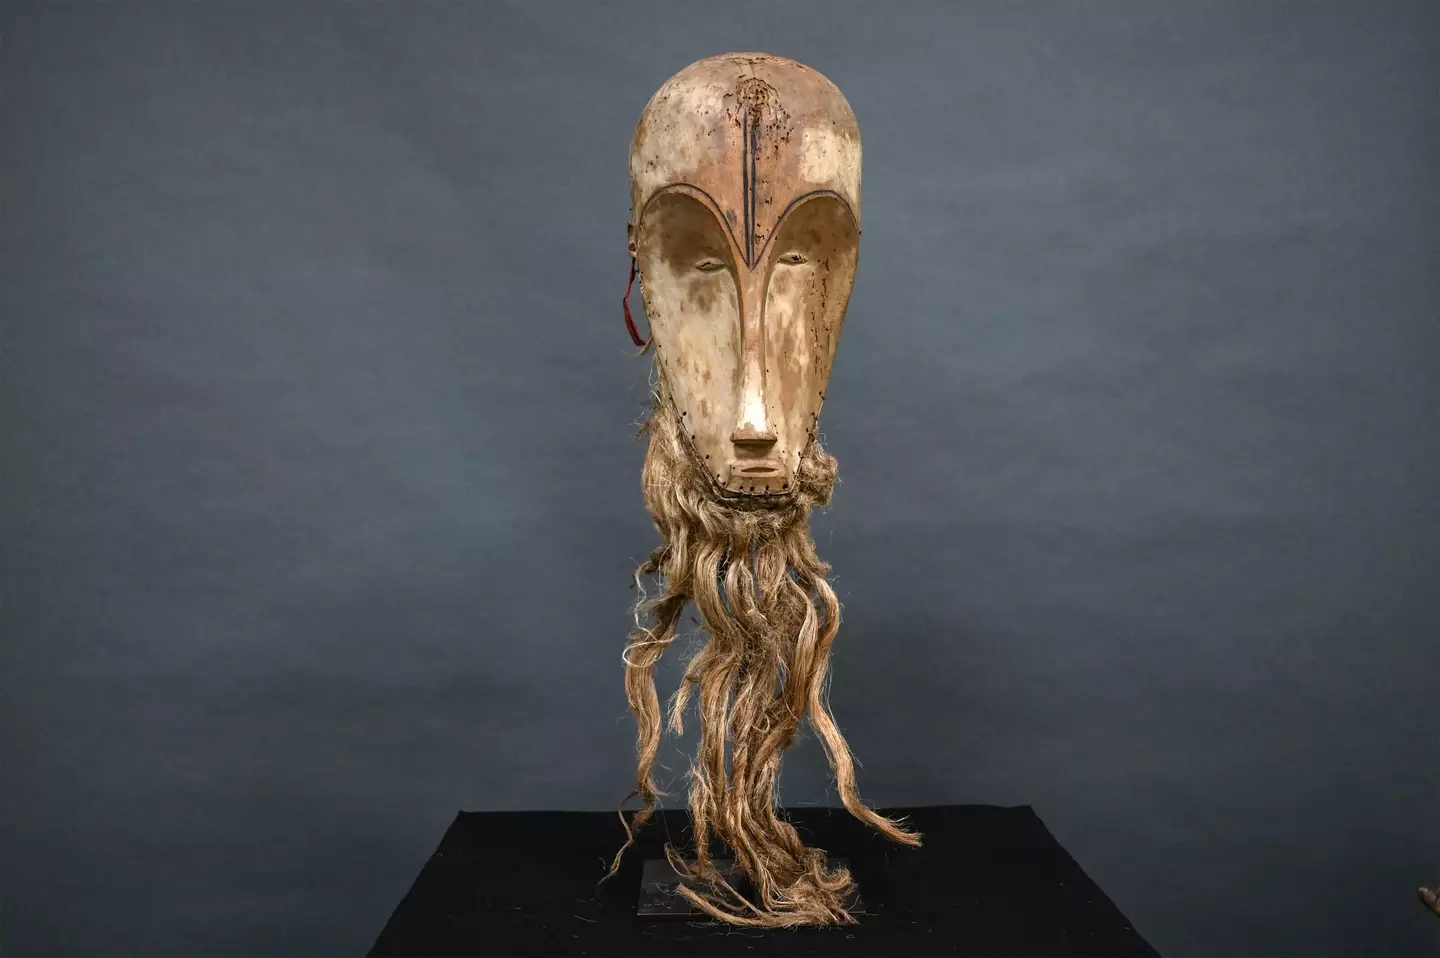 The "Ngil" mask of the Fang people of Gabon sold for more than $4.4 million.